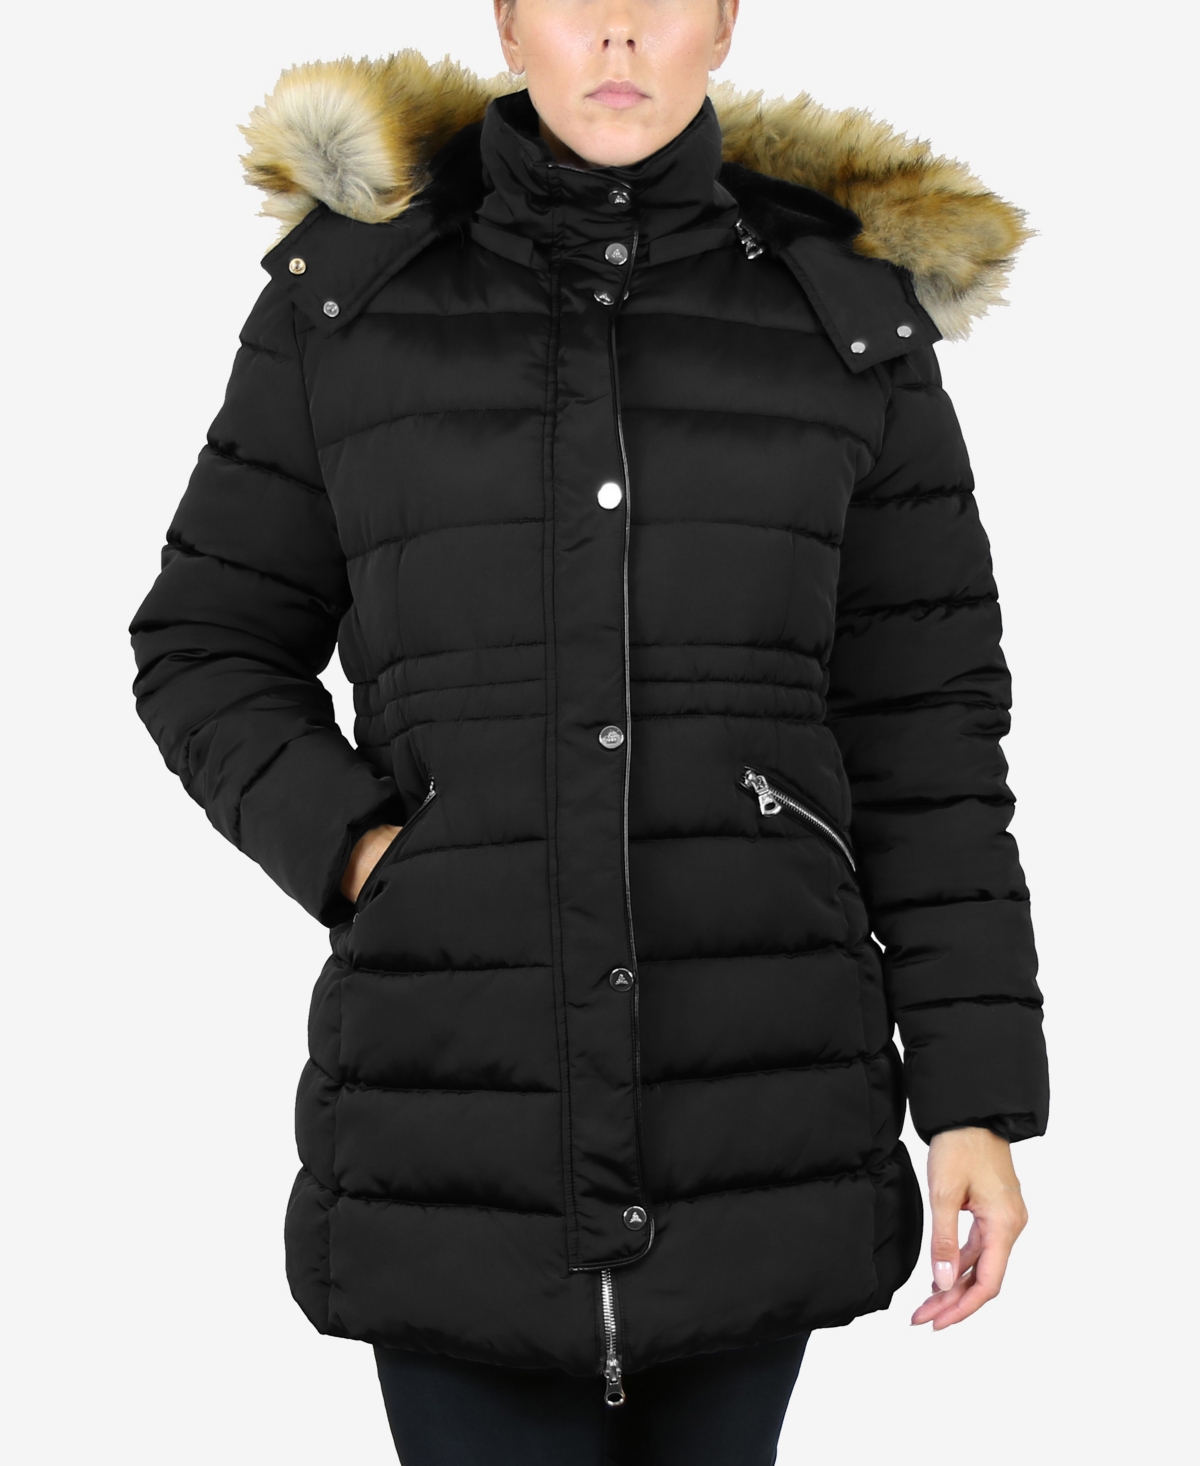 GALAXY BY HARVIC WOMEN'S HEAVYWEIGHT PARKA COAT WITH DETACHABLE FAUX FUR HOOD